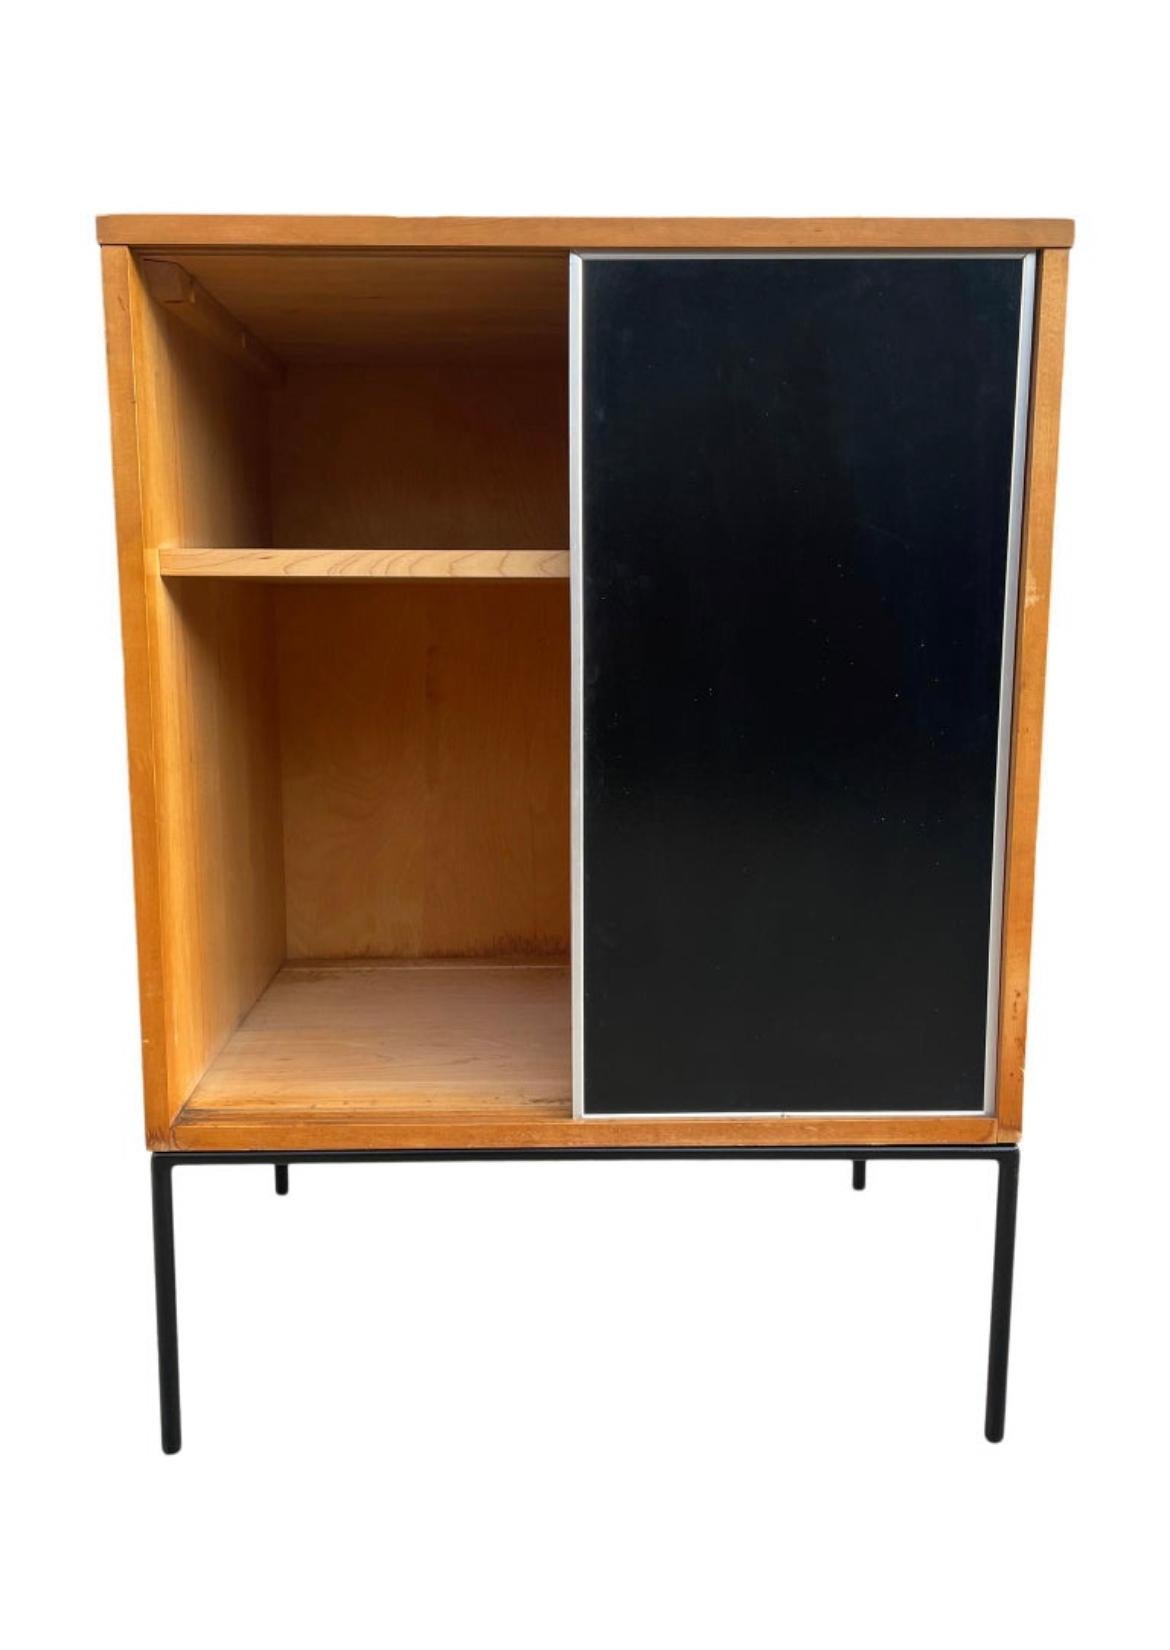 American Midcentury Small Maple Cabinet by Paul McCobb Planner Group #1512 B&W Doors For Sale